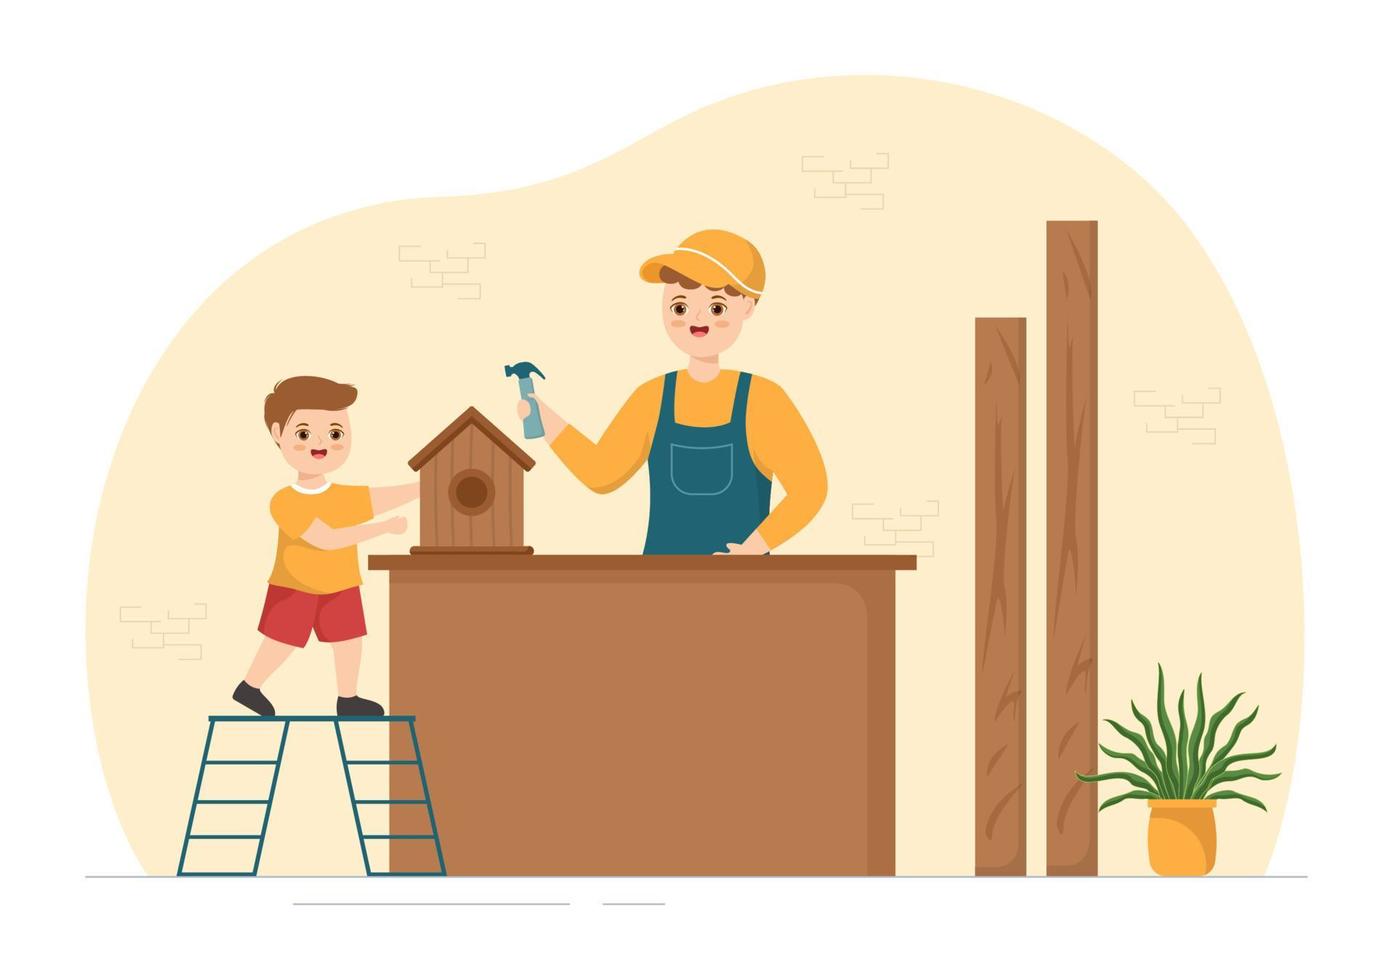 Woodworking with Wood Cutting by Modern Kids Craftsman and Worker using Tools Set in Flat Cartoon Hand Drawn Template Illustration vector